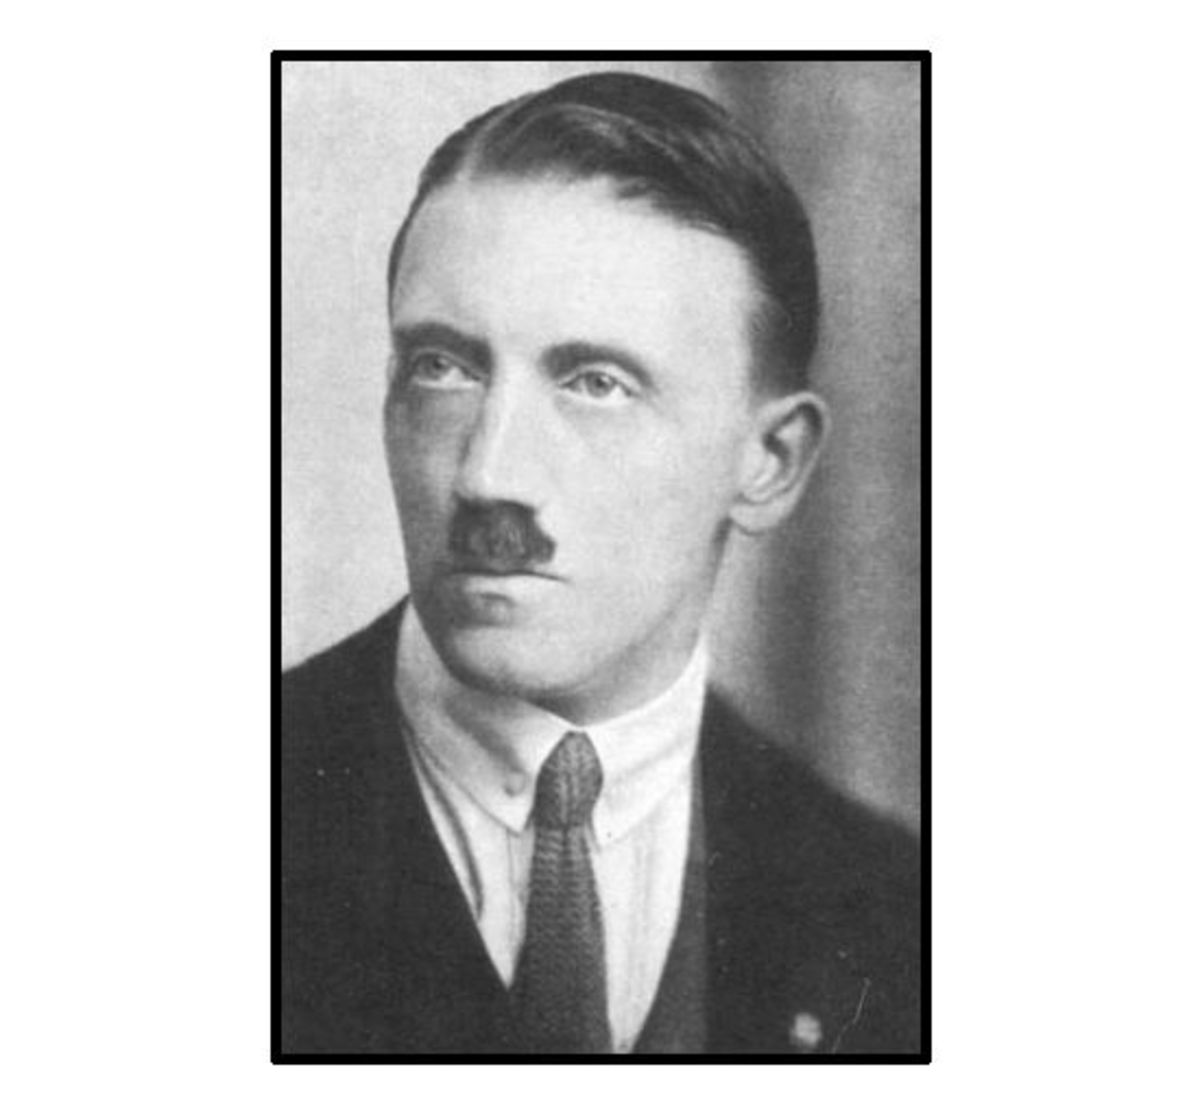 Adolf Hitler in early 1920's.